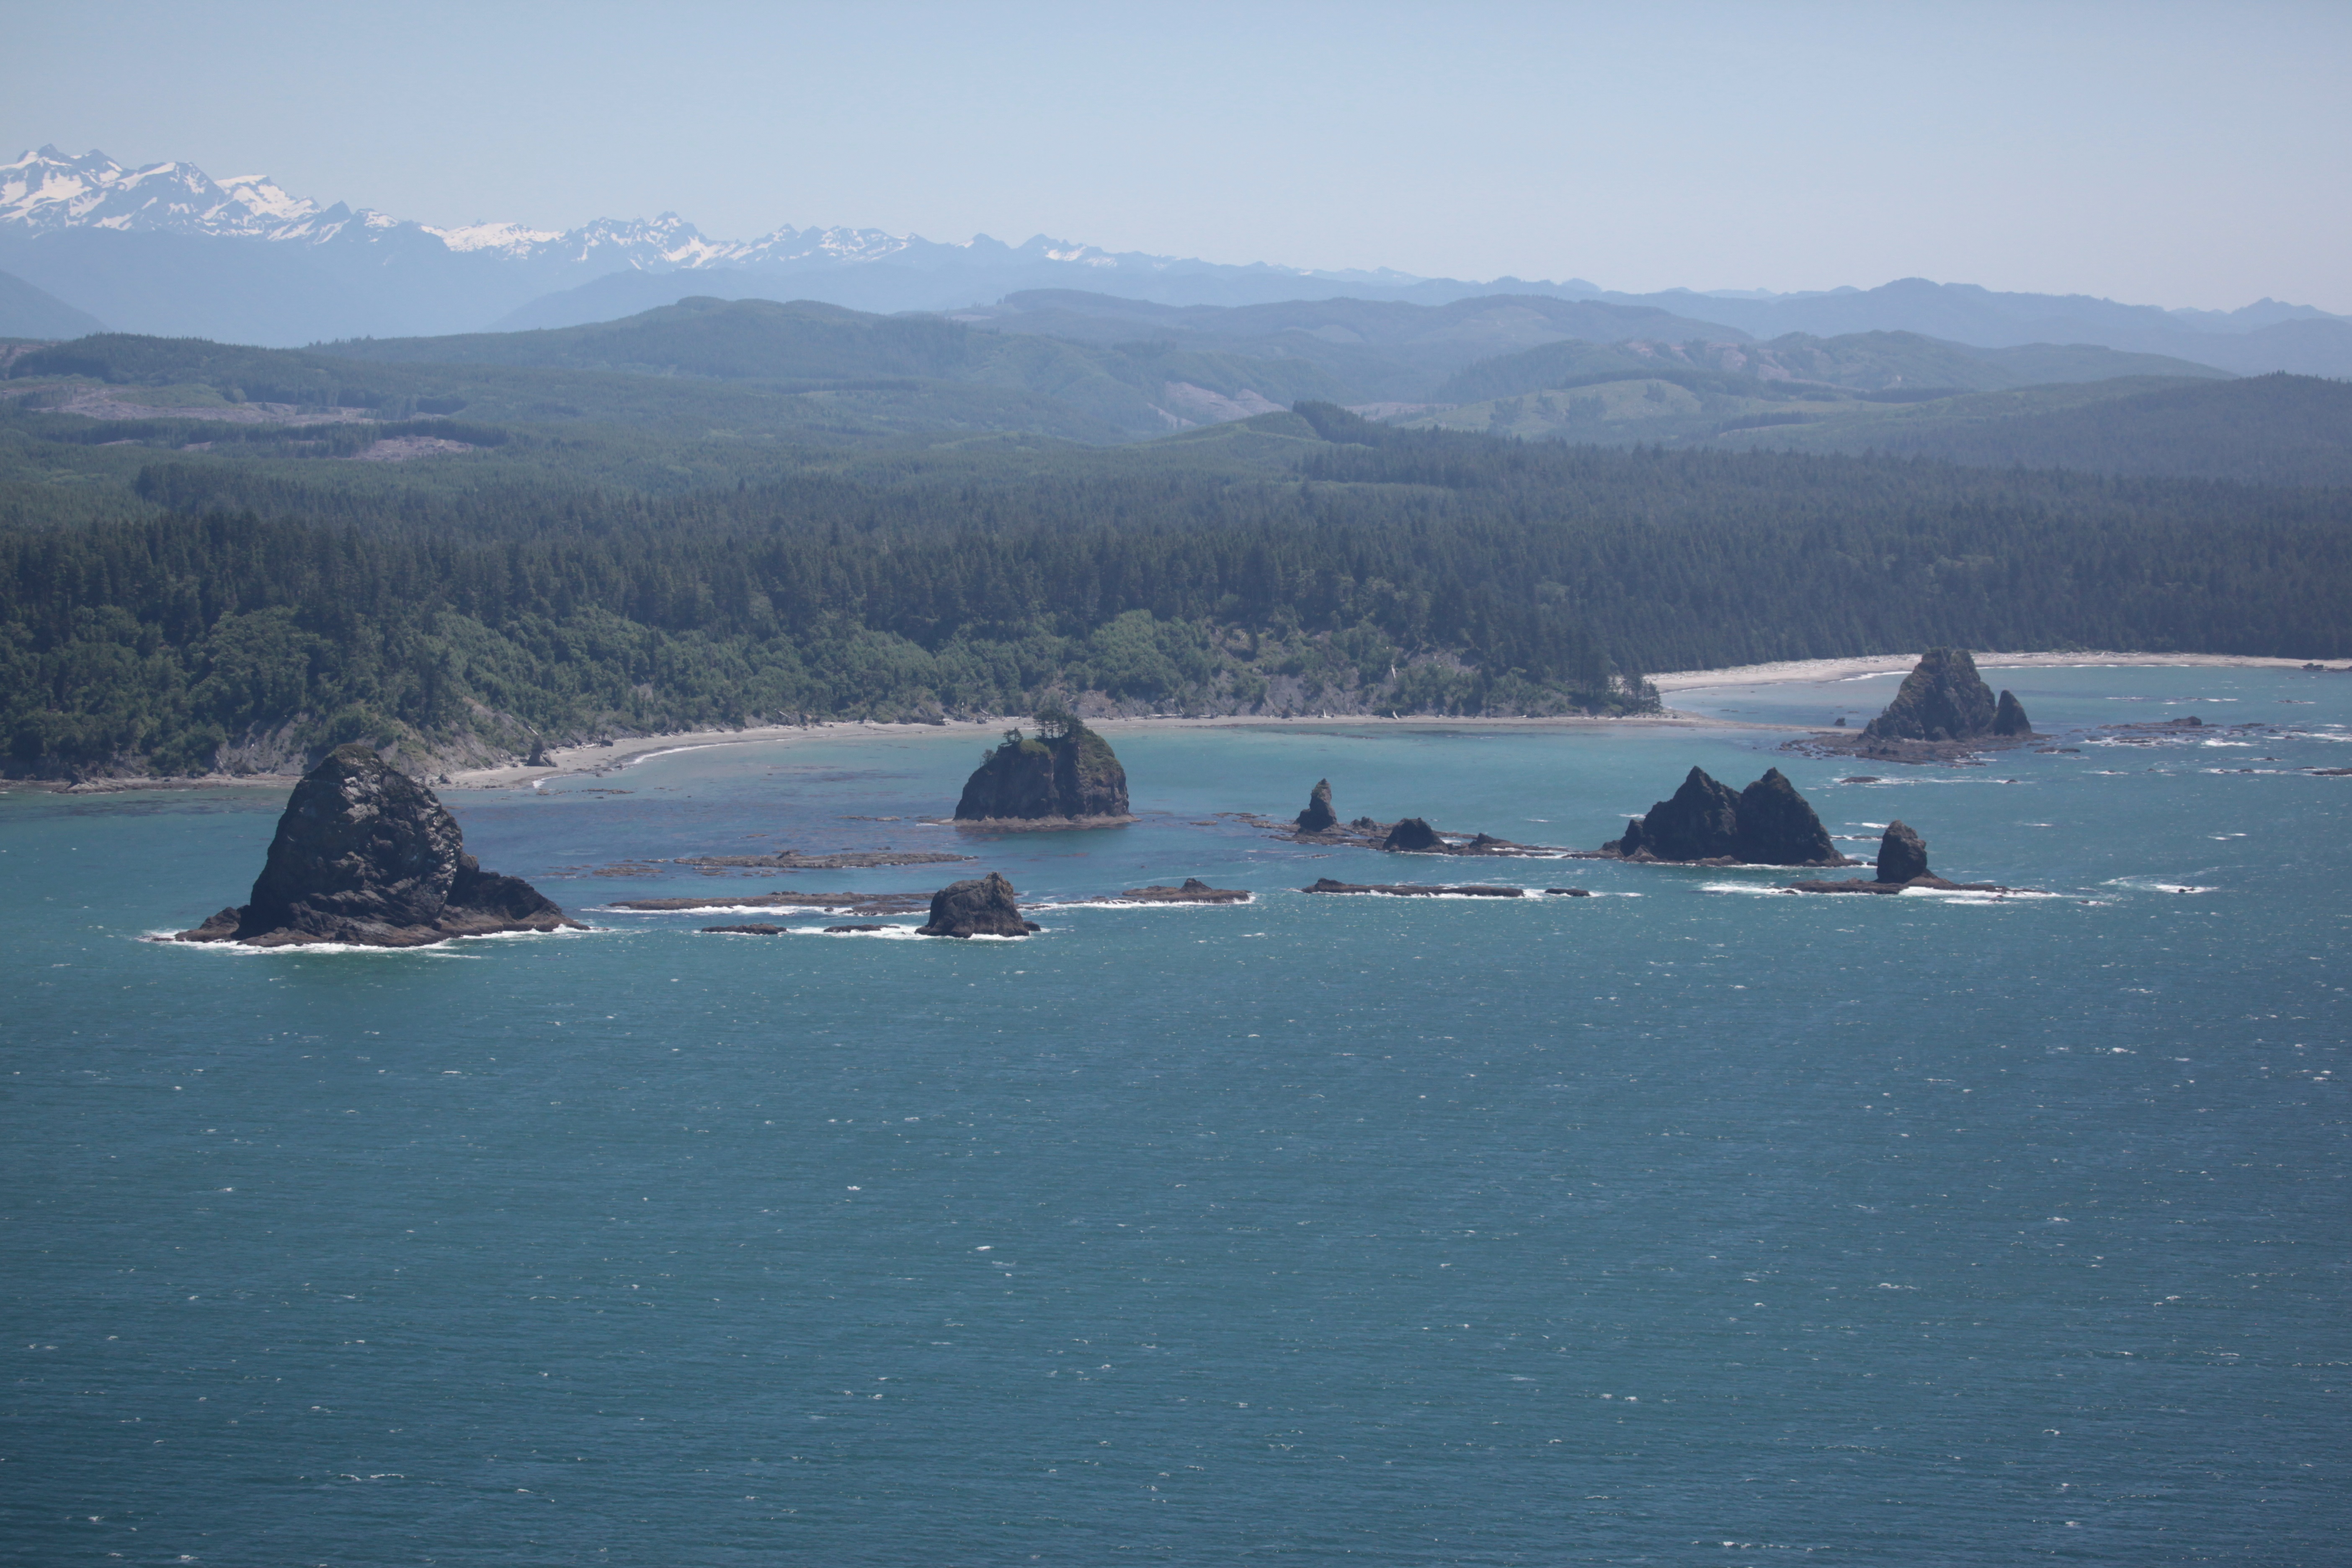 Some of Washington's coastal islands viewed from offshore